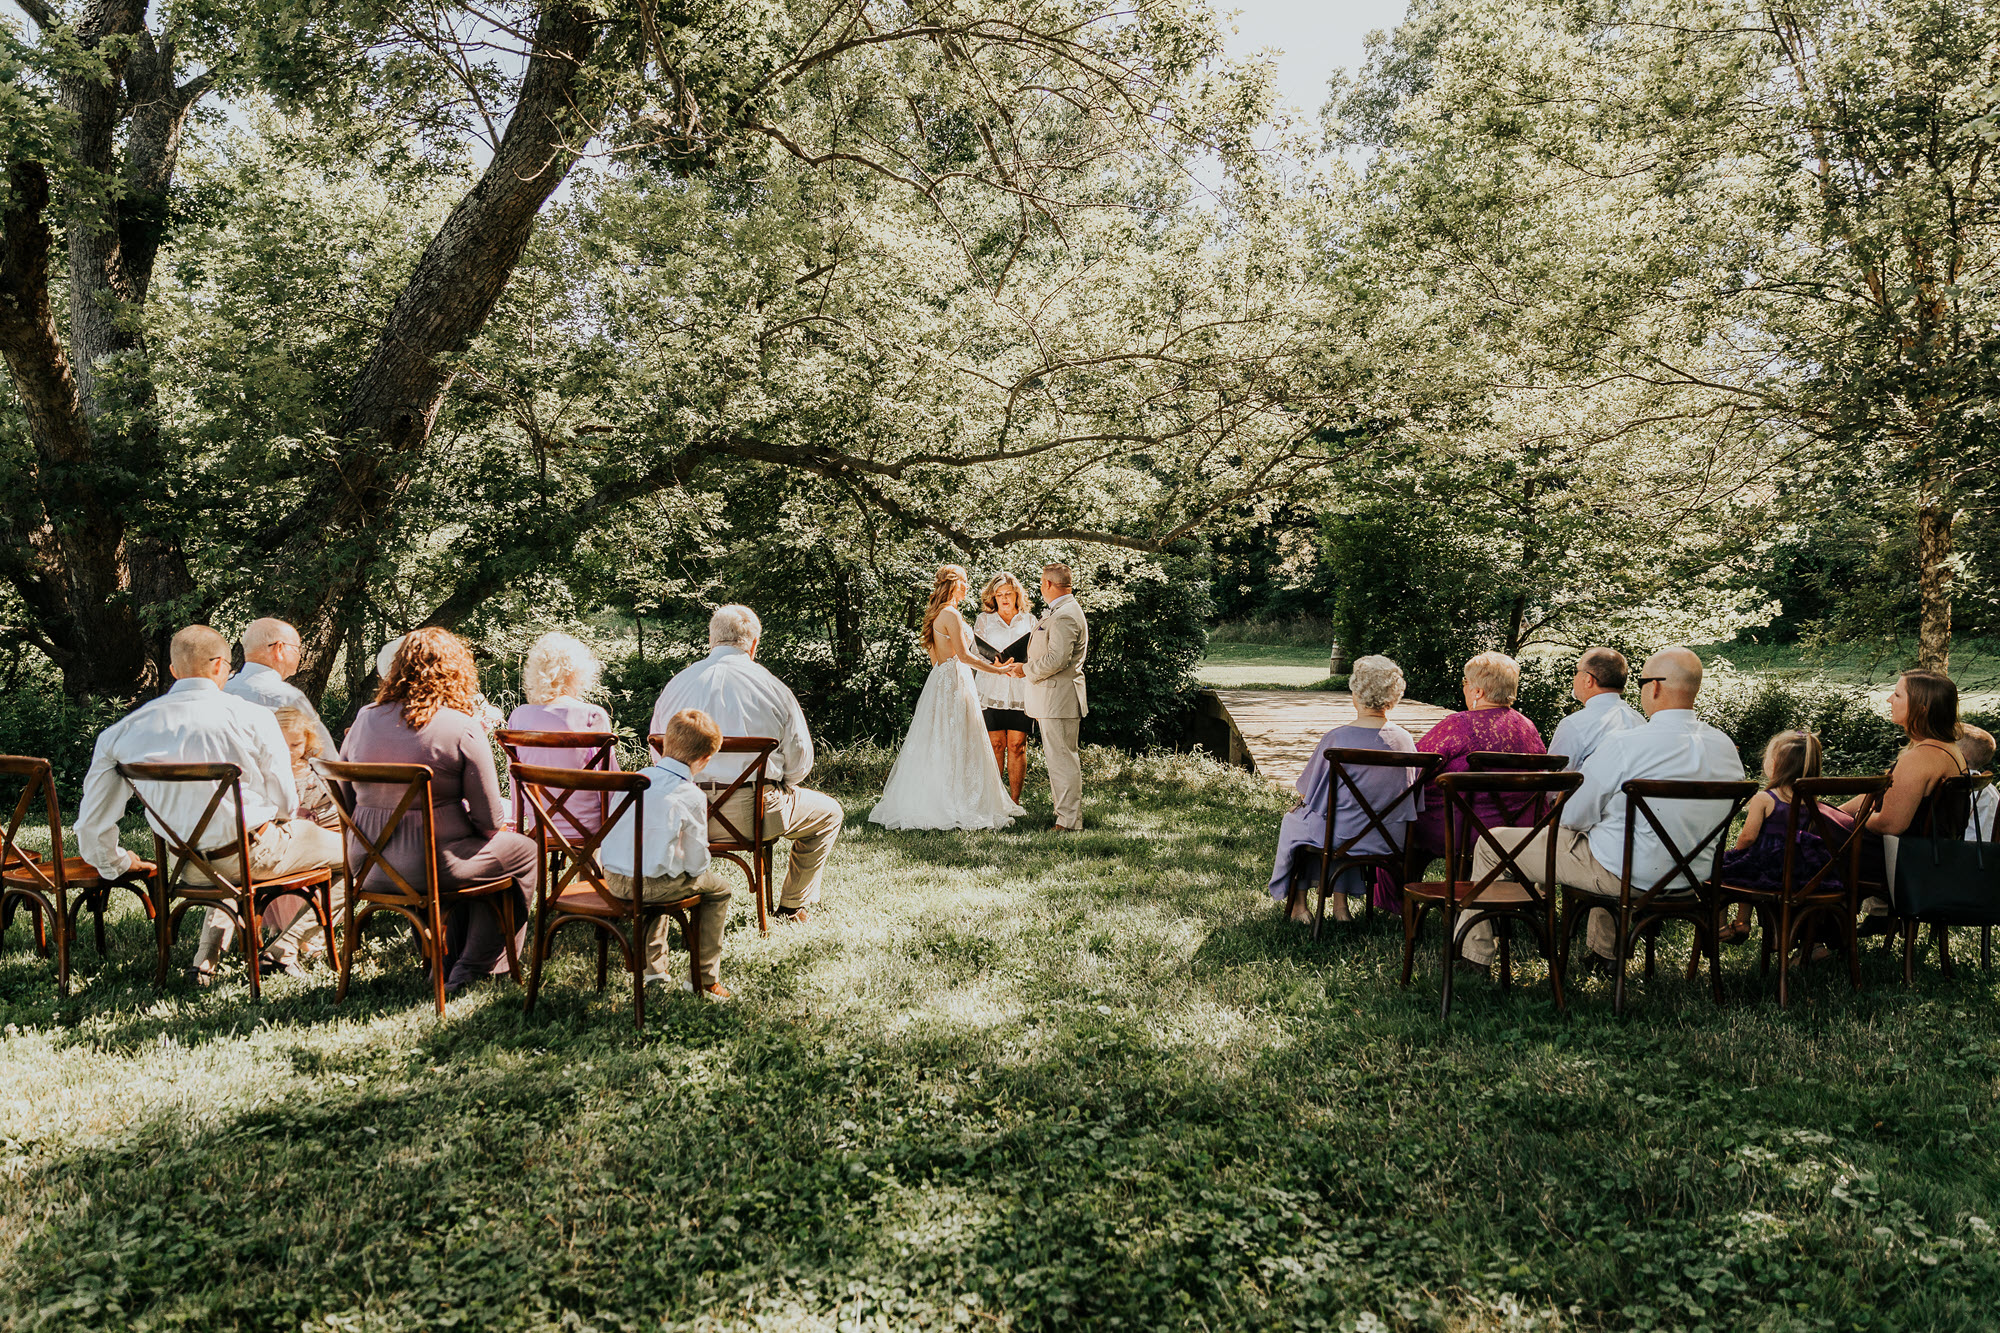 Bridal Couple Exchanging Vows at a Brunch Wedding Garden Ceremony